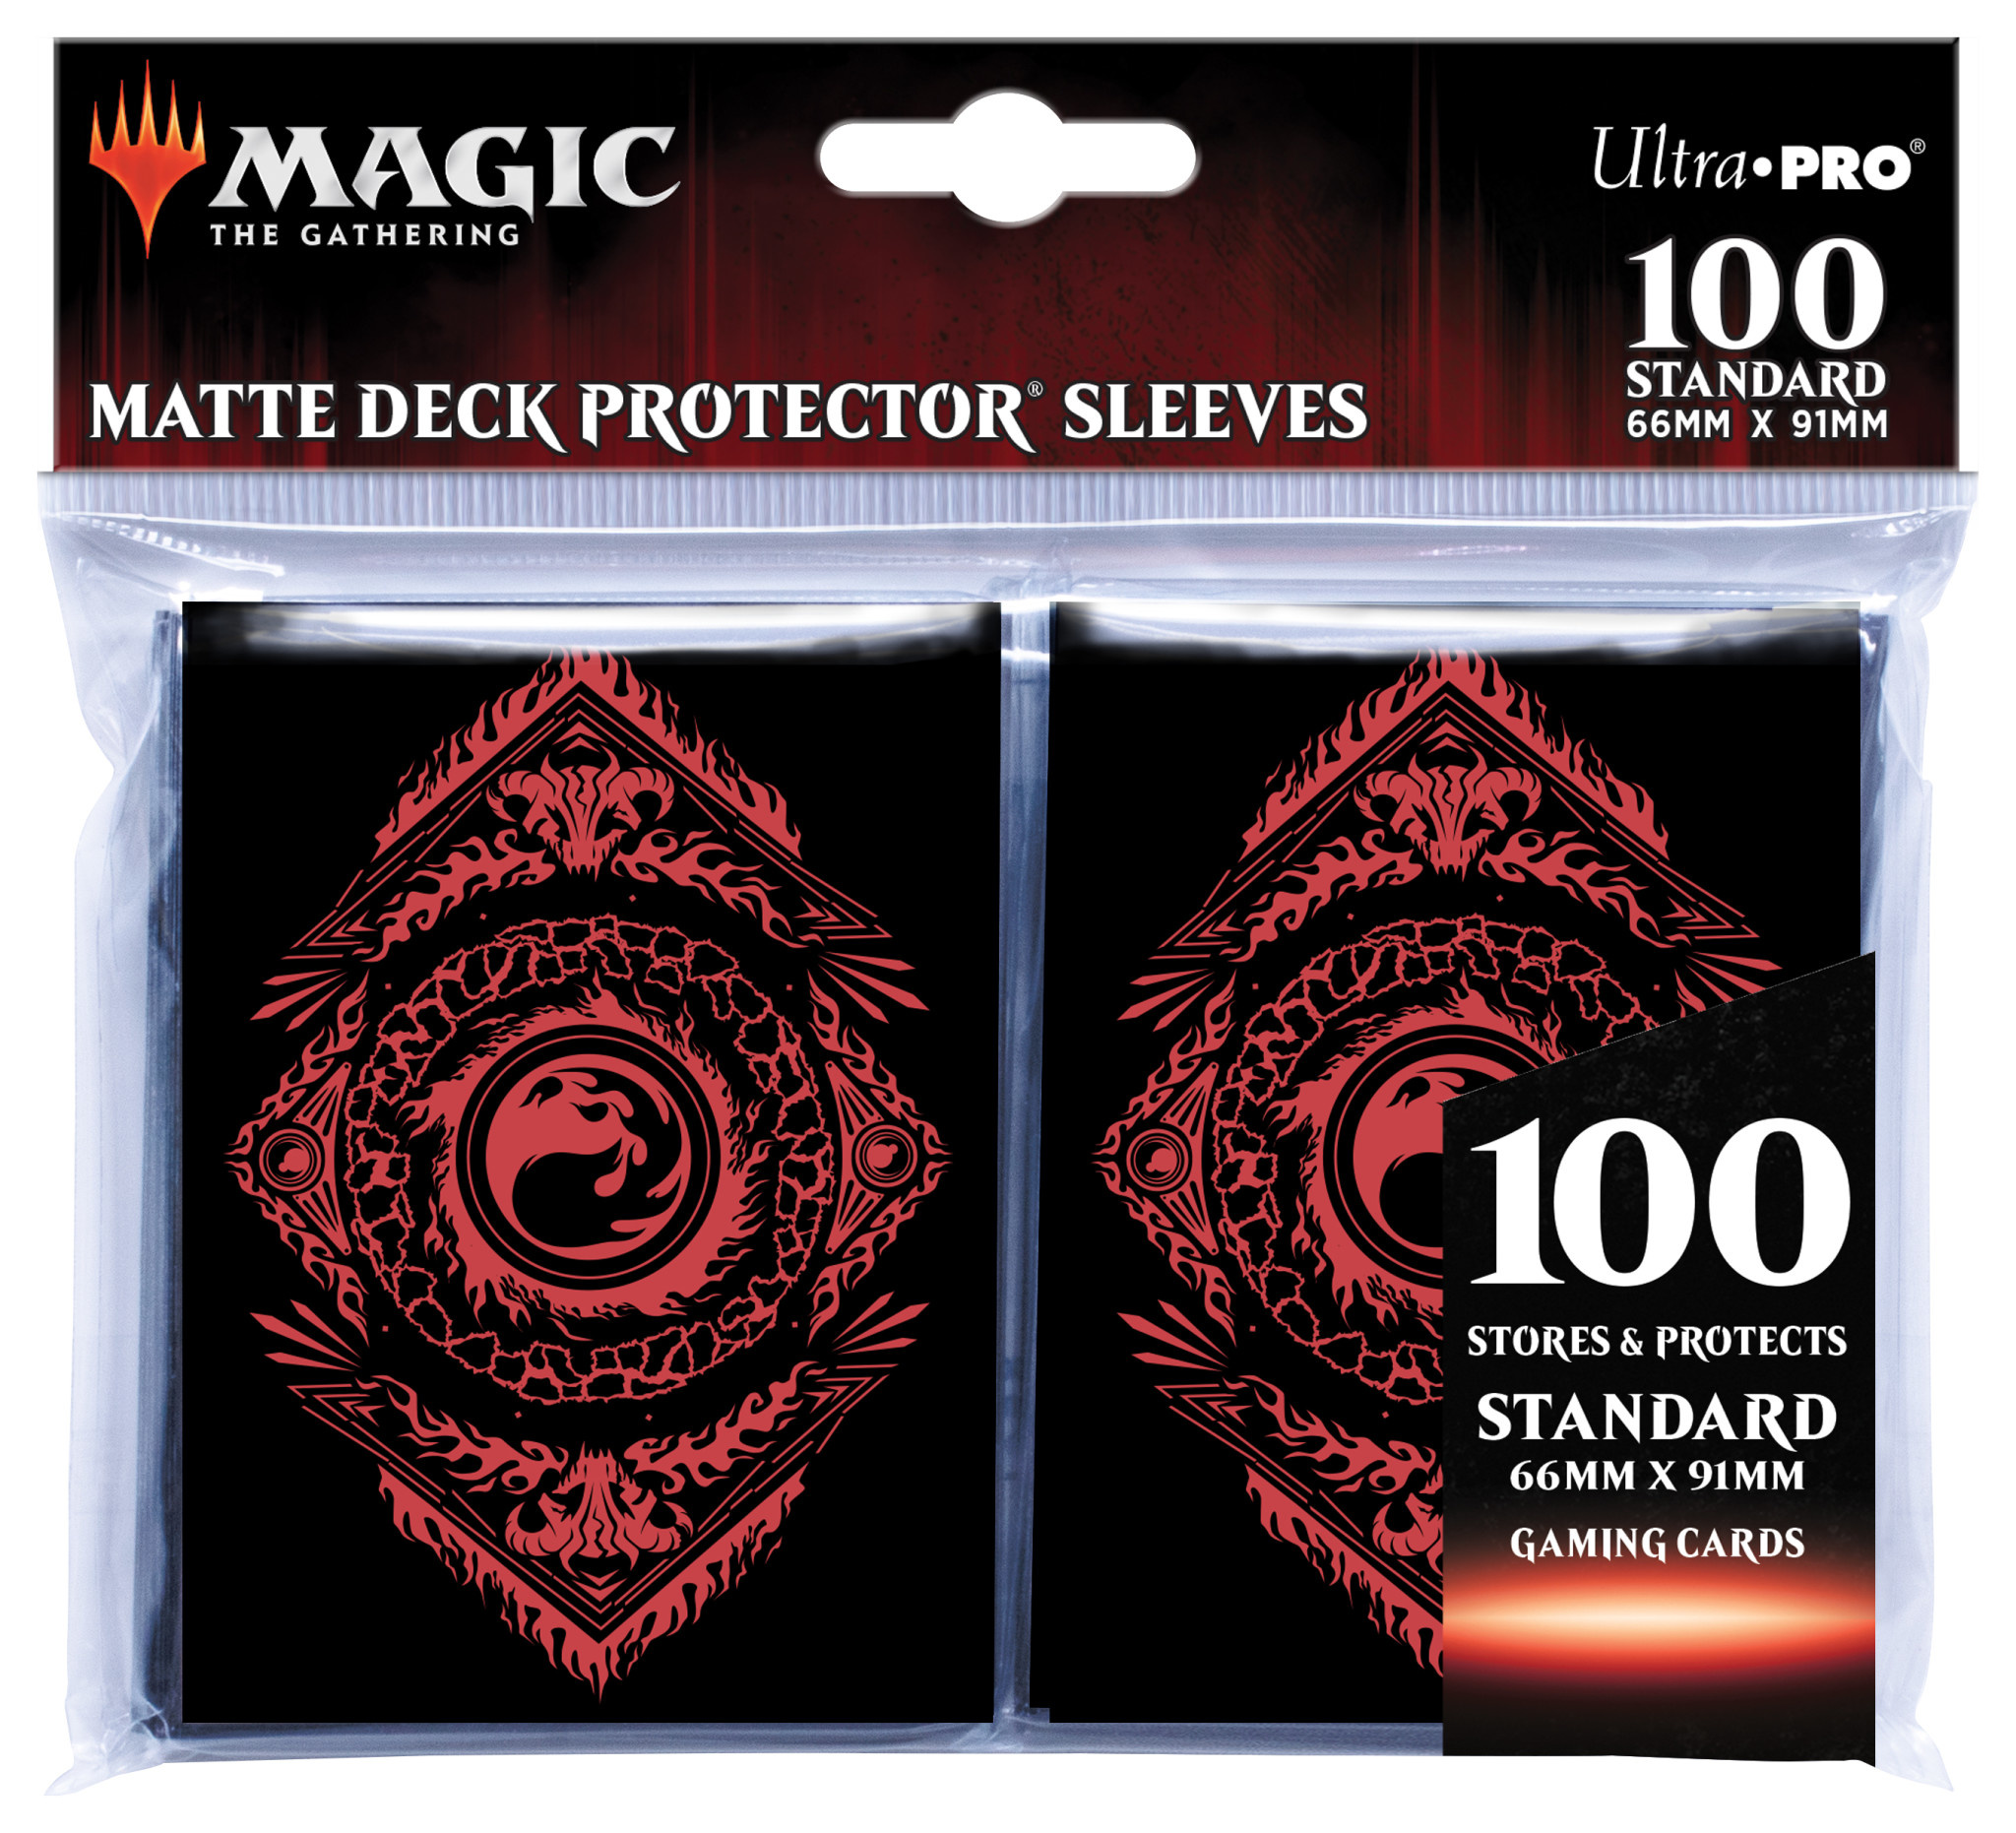 Double sleeve your yu-gi-oh decks or - Imperium Duelist